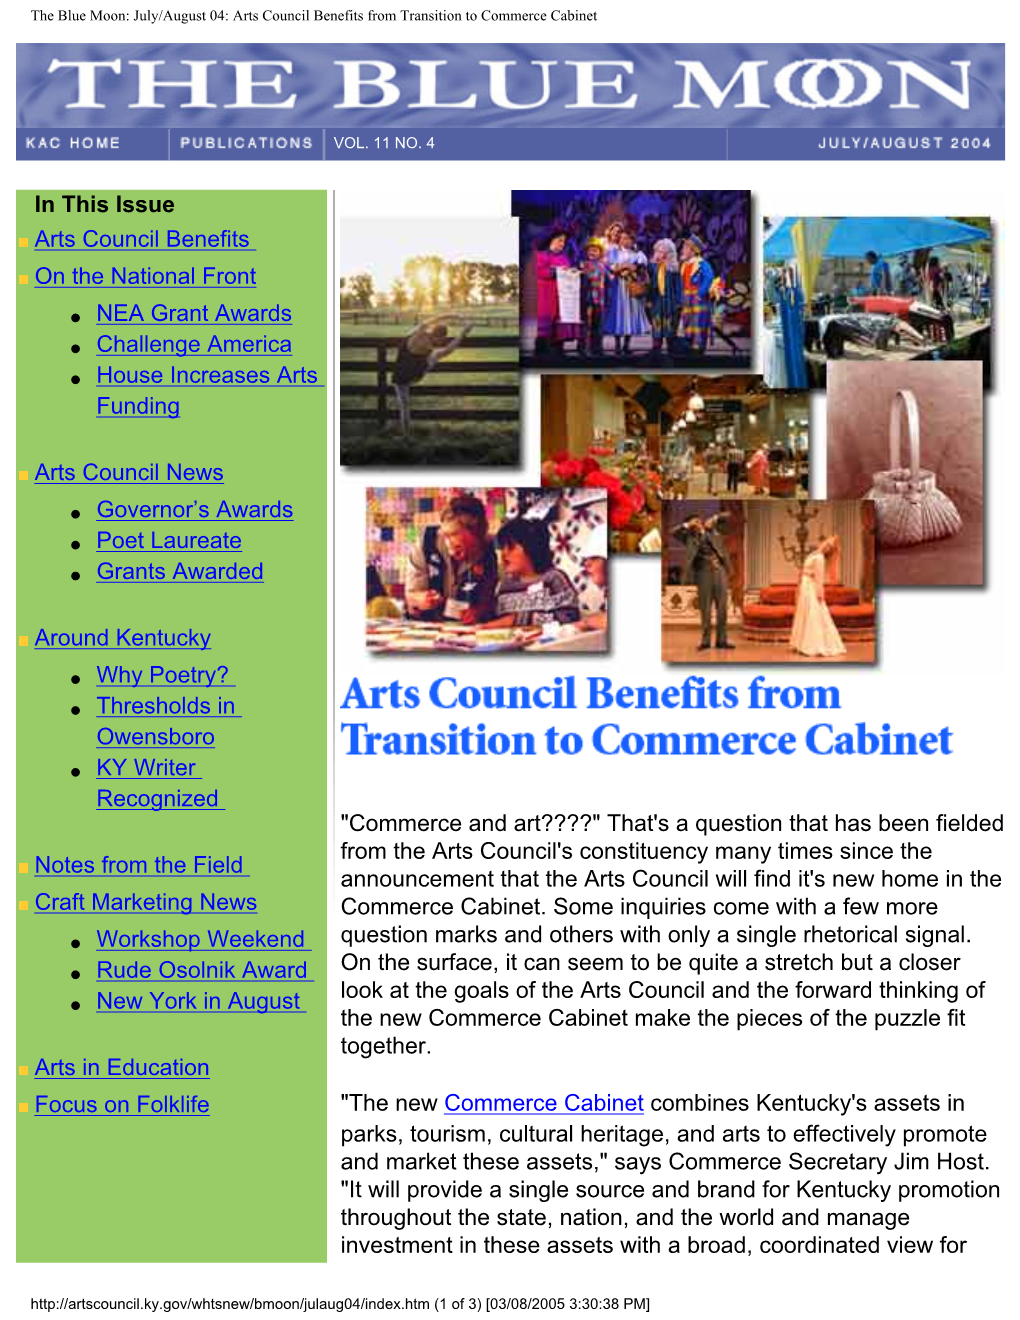 The Blue Moon: July/August 04: Arts Council Benefits from Transition to Commerce Cabinet